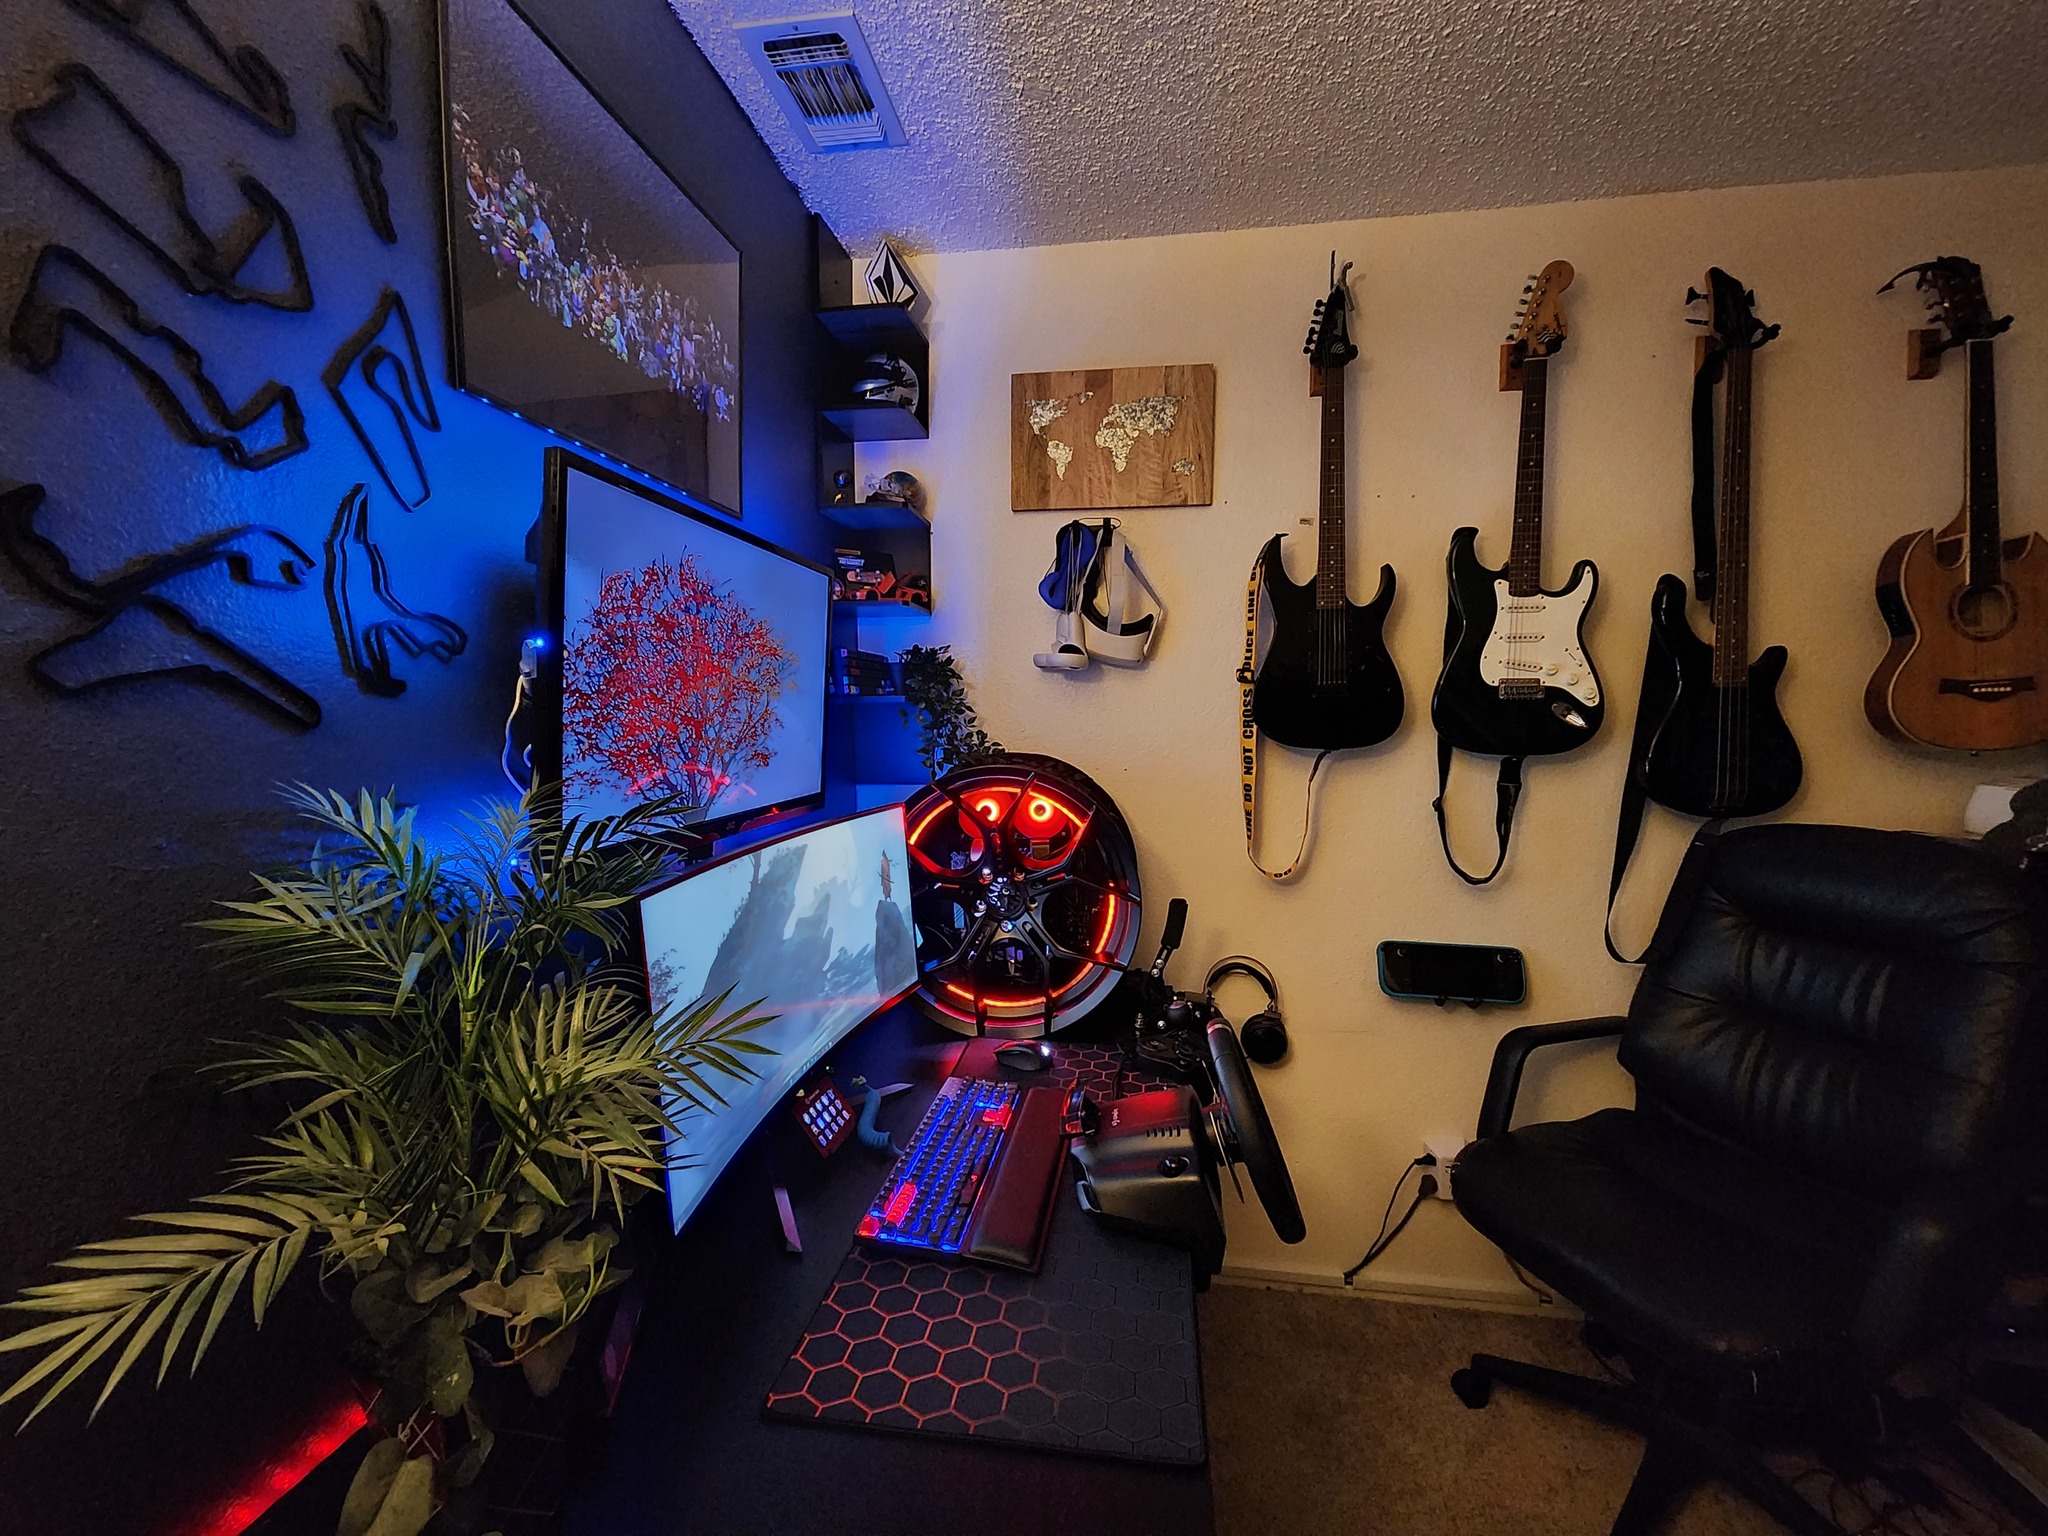 The car wheel gaming PC inside a gaming room with mounted guitars